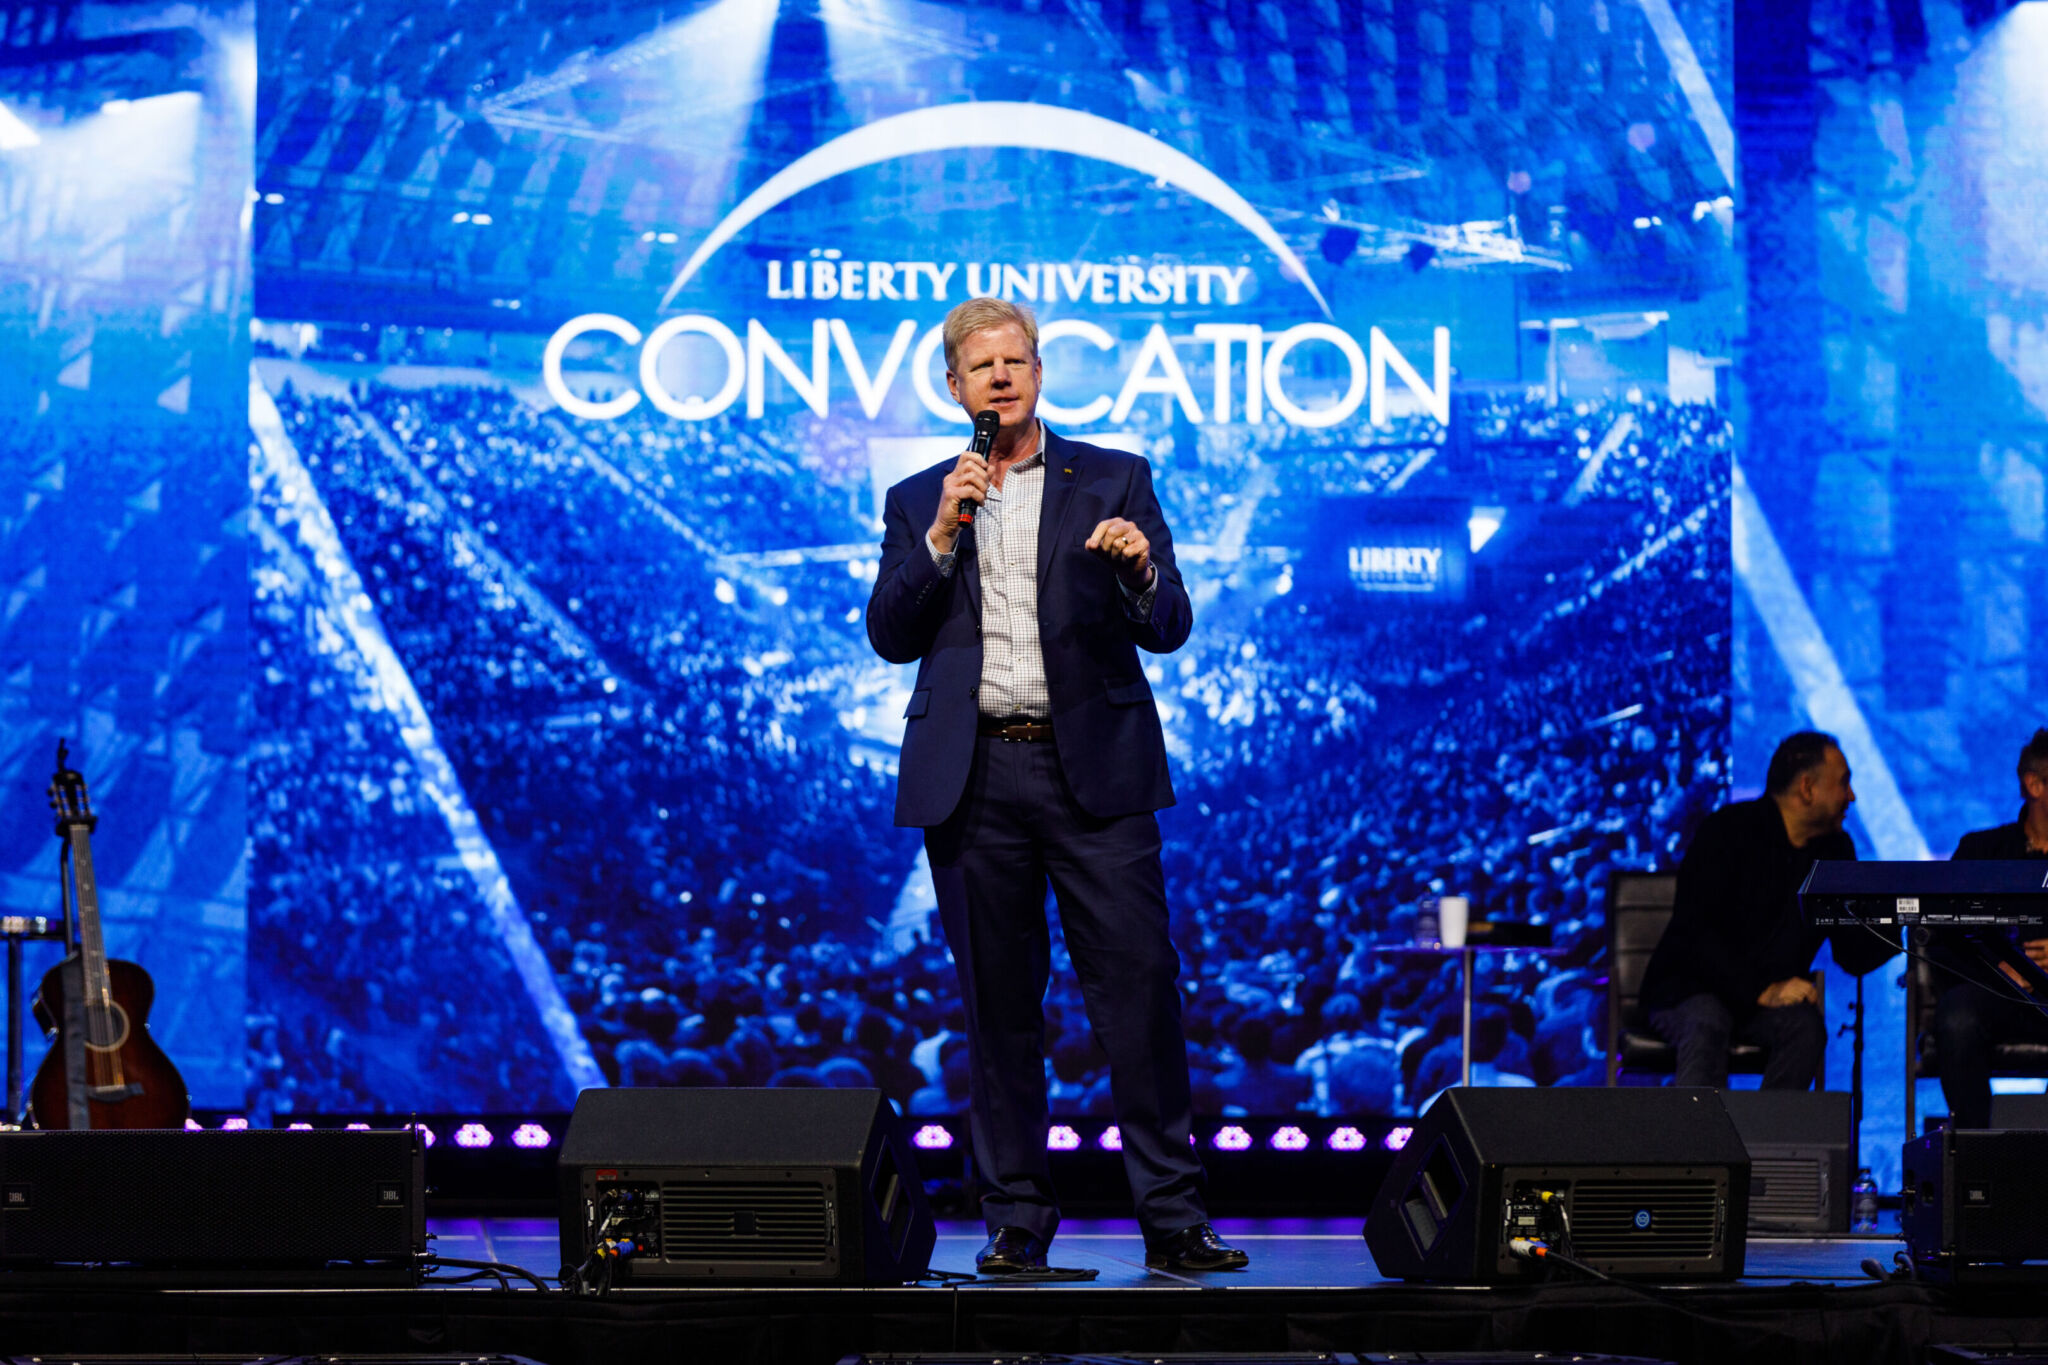 College For A Weekend (CFAW) | Liberty University